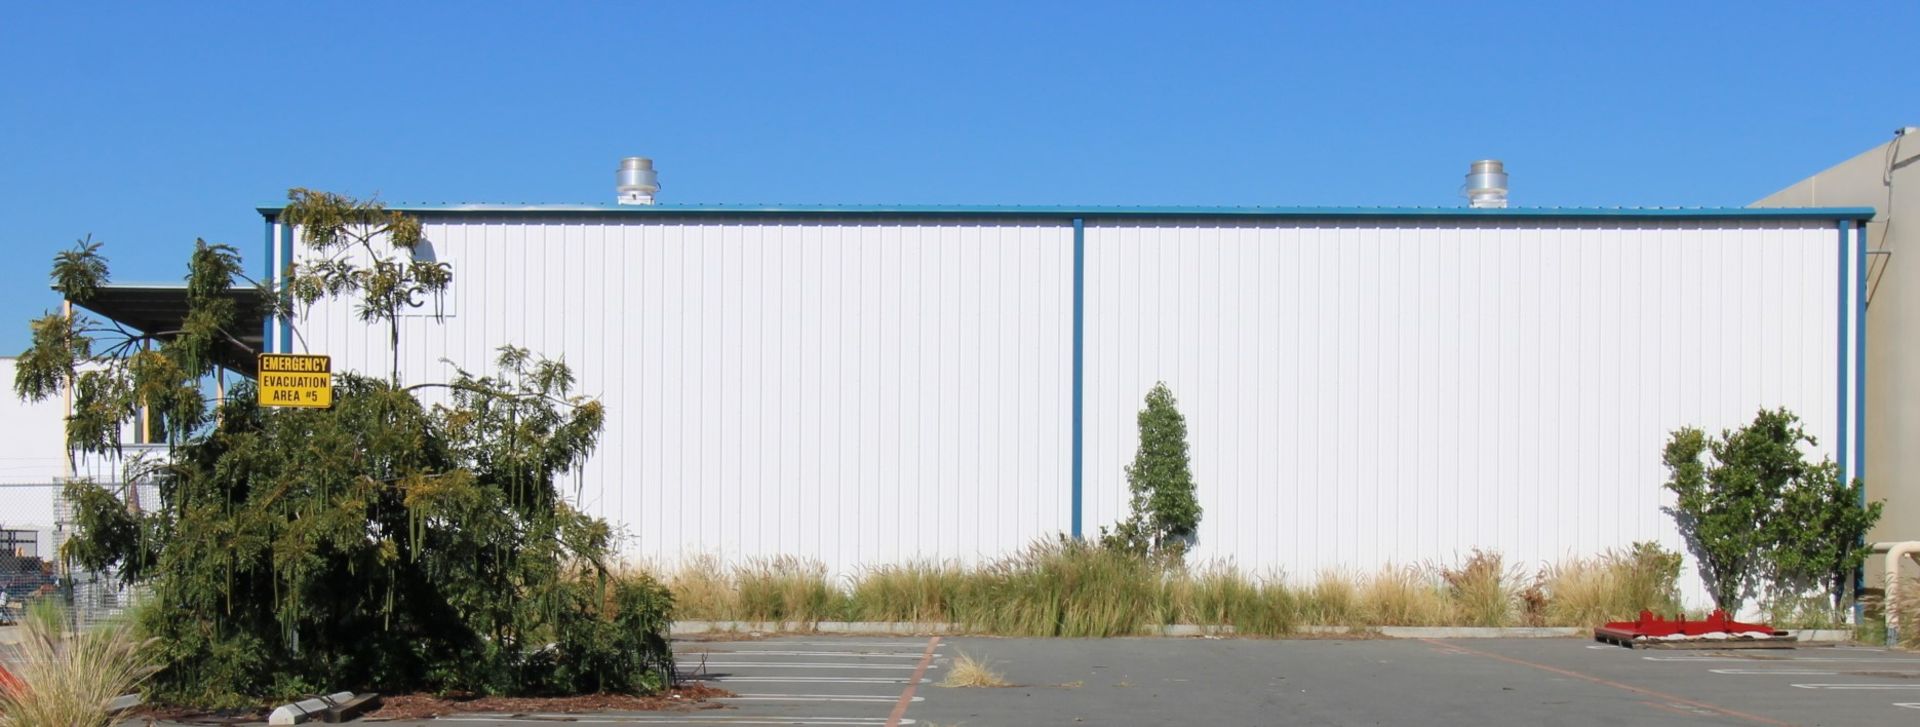 FREE STANDING METAL BUILDING, 48’W. X 78’L. X 20’ EAVE HT. INTERIOR DIMS., building constructed - Image 3 of 9